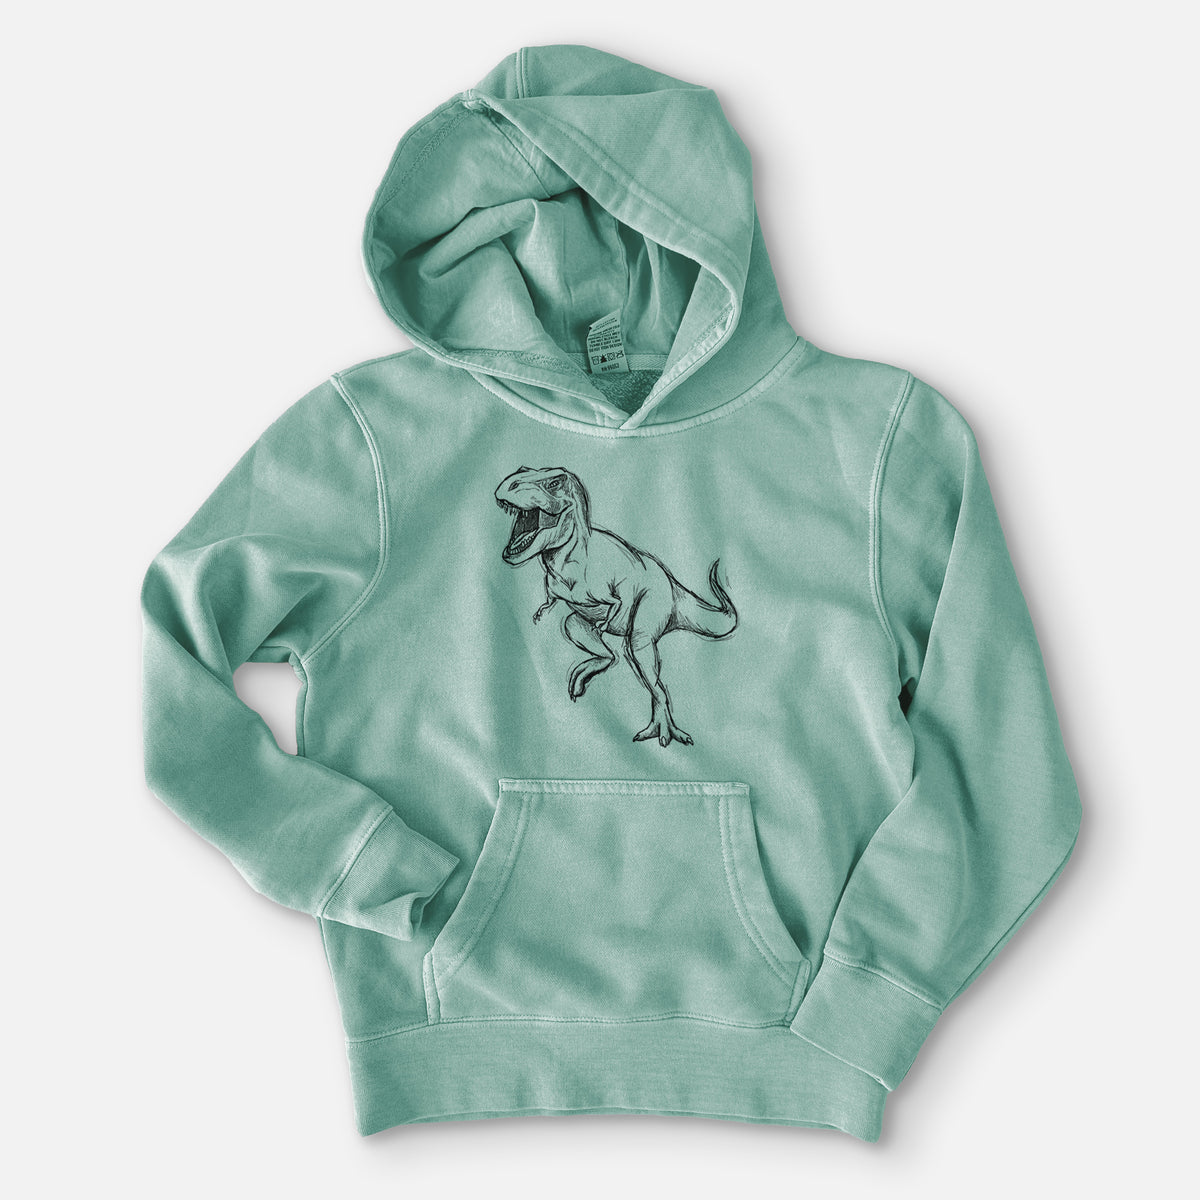 Tyrannosaurus Rex - Youth Pigment Dyed Hoodie